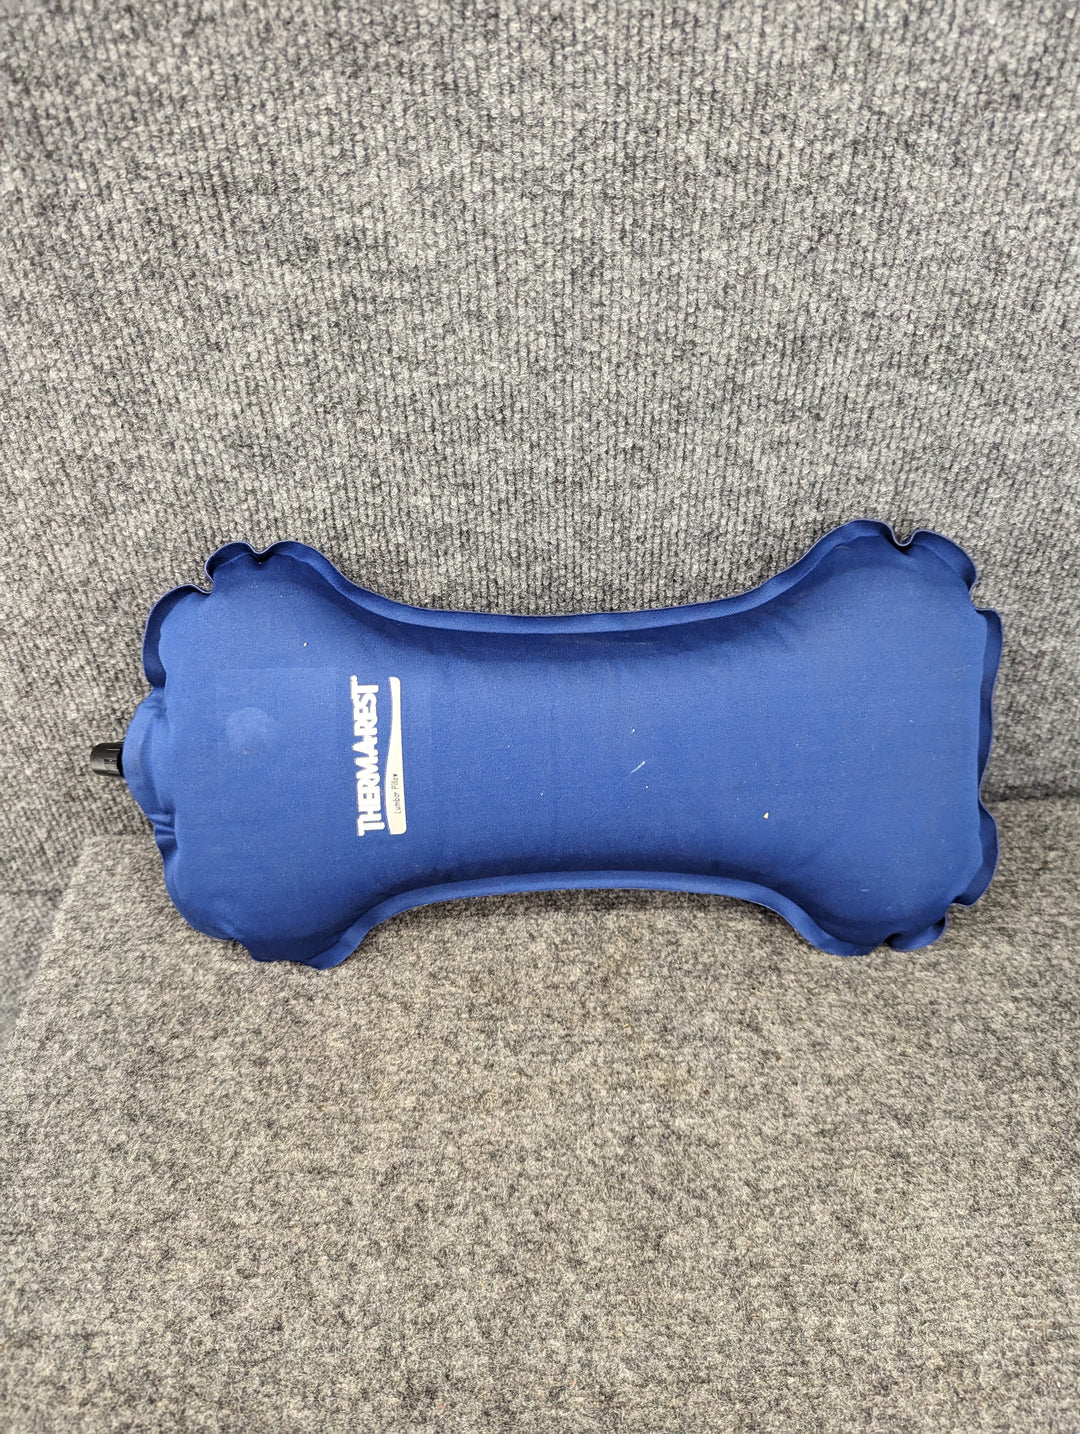 Therm-a-rest Inflatable Lumbar Support